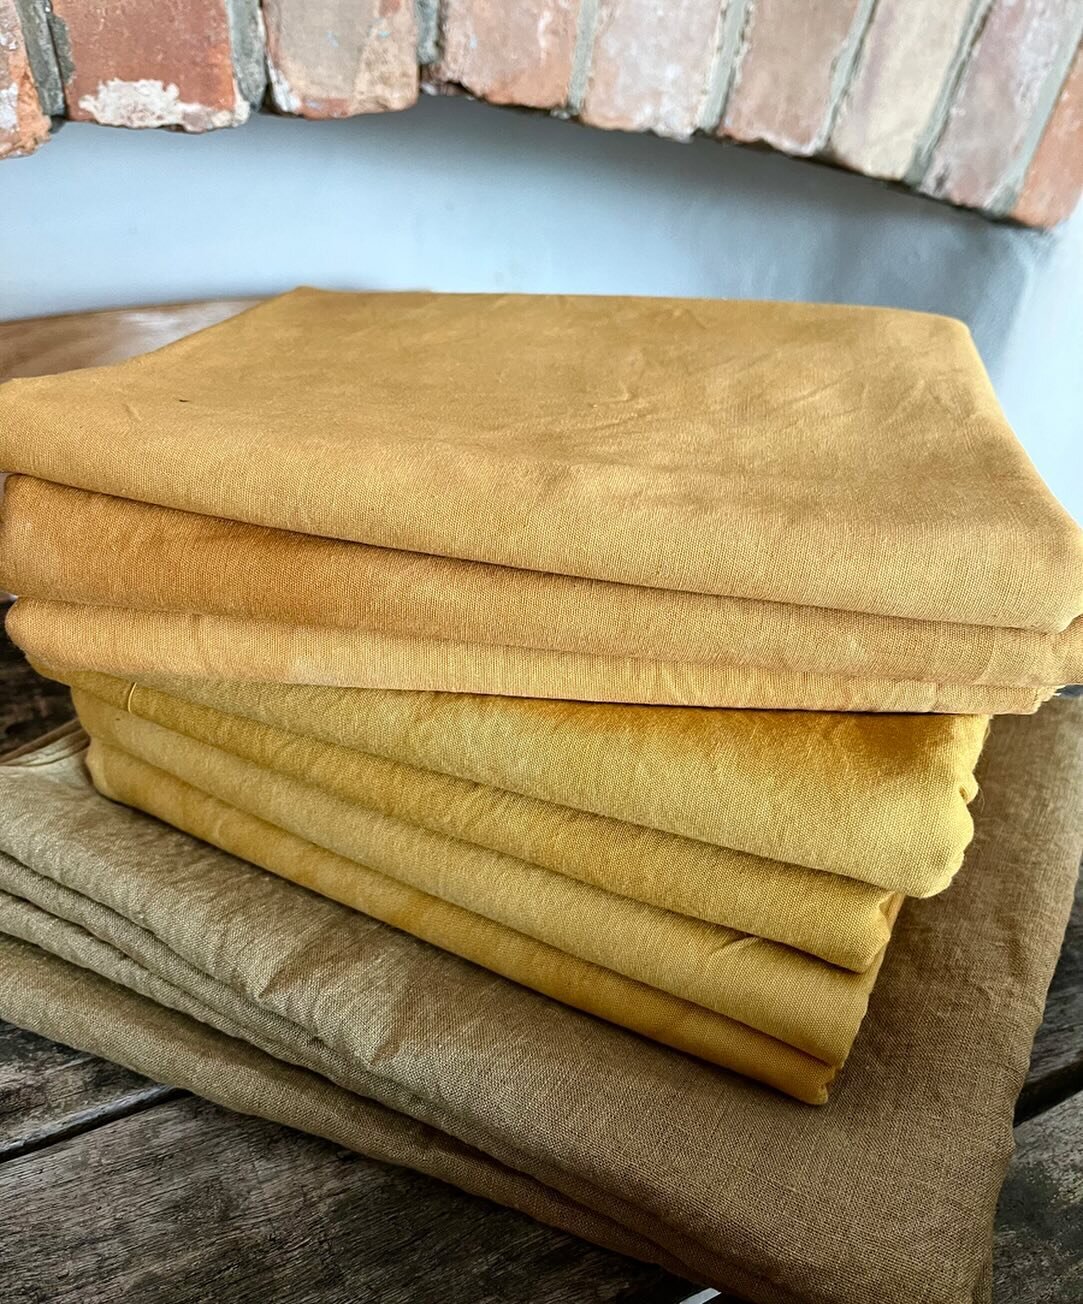 Find a selection of our naturally dyed fabrics @albatross_totnes, plus some natural dye kits (which are also stocked @butterwalk.co.uk in Totnes and @thecraftmongers in Ashburton). Find them on our website too! 

#happyshopping #naturaldyekits #natur